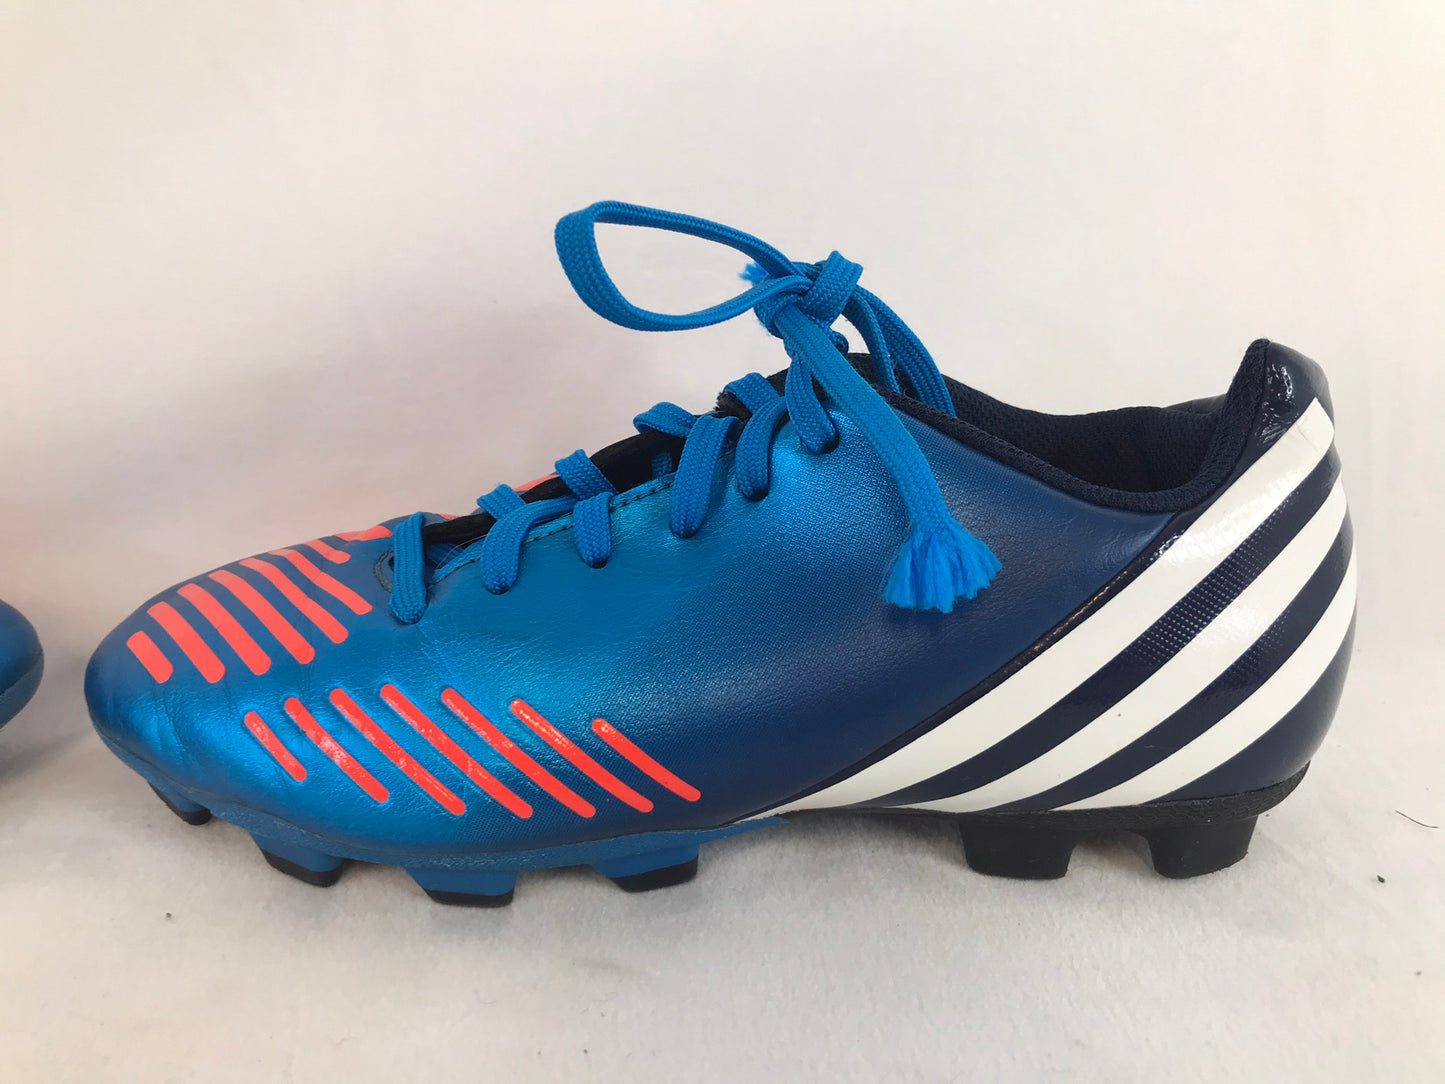 Soccer Shoes Cleats Child Size 3 Adidas Preditor Blue Orange